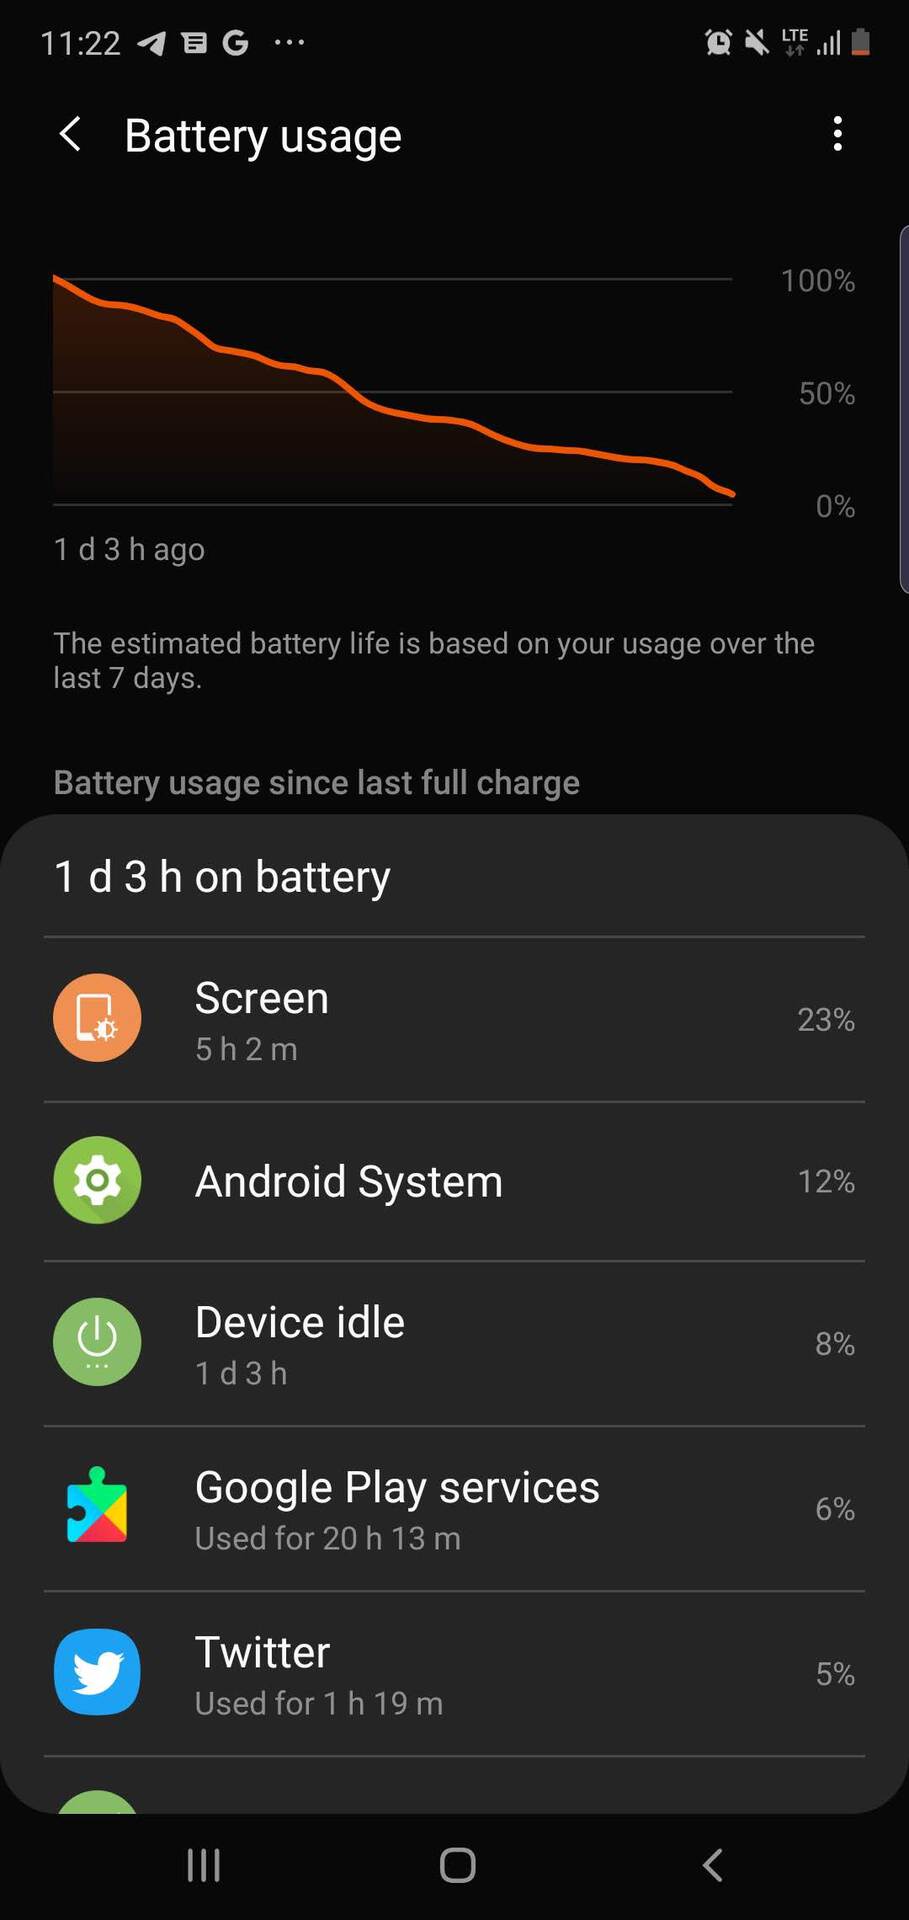 Samsung Galaxy Note 10 Plus battery life 1